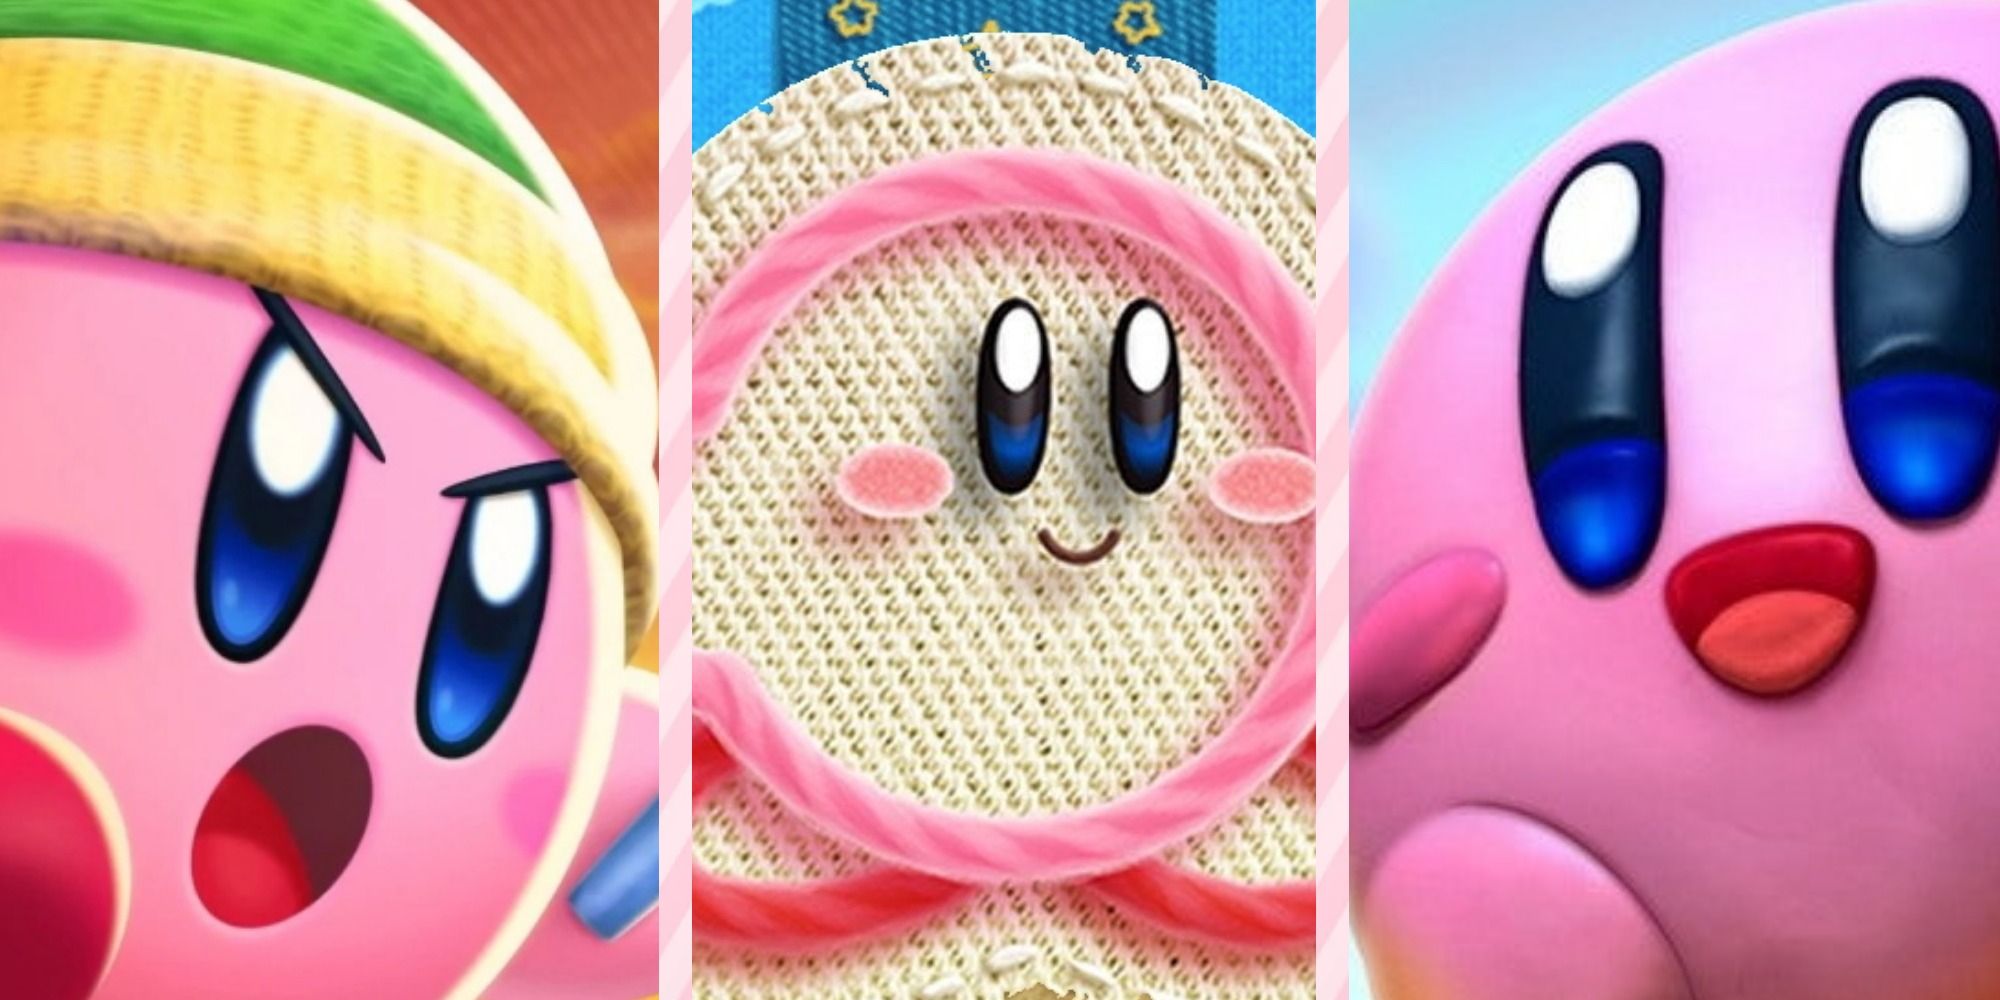 Kirby Spinoff Featured Image with images from Kirby Fighters 2, Kirby's Epic Yarn, and Kirby and the Rainbow Curse